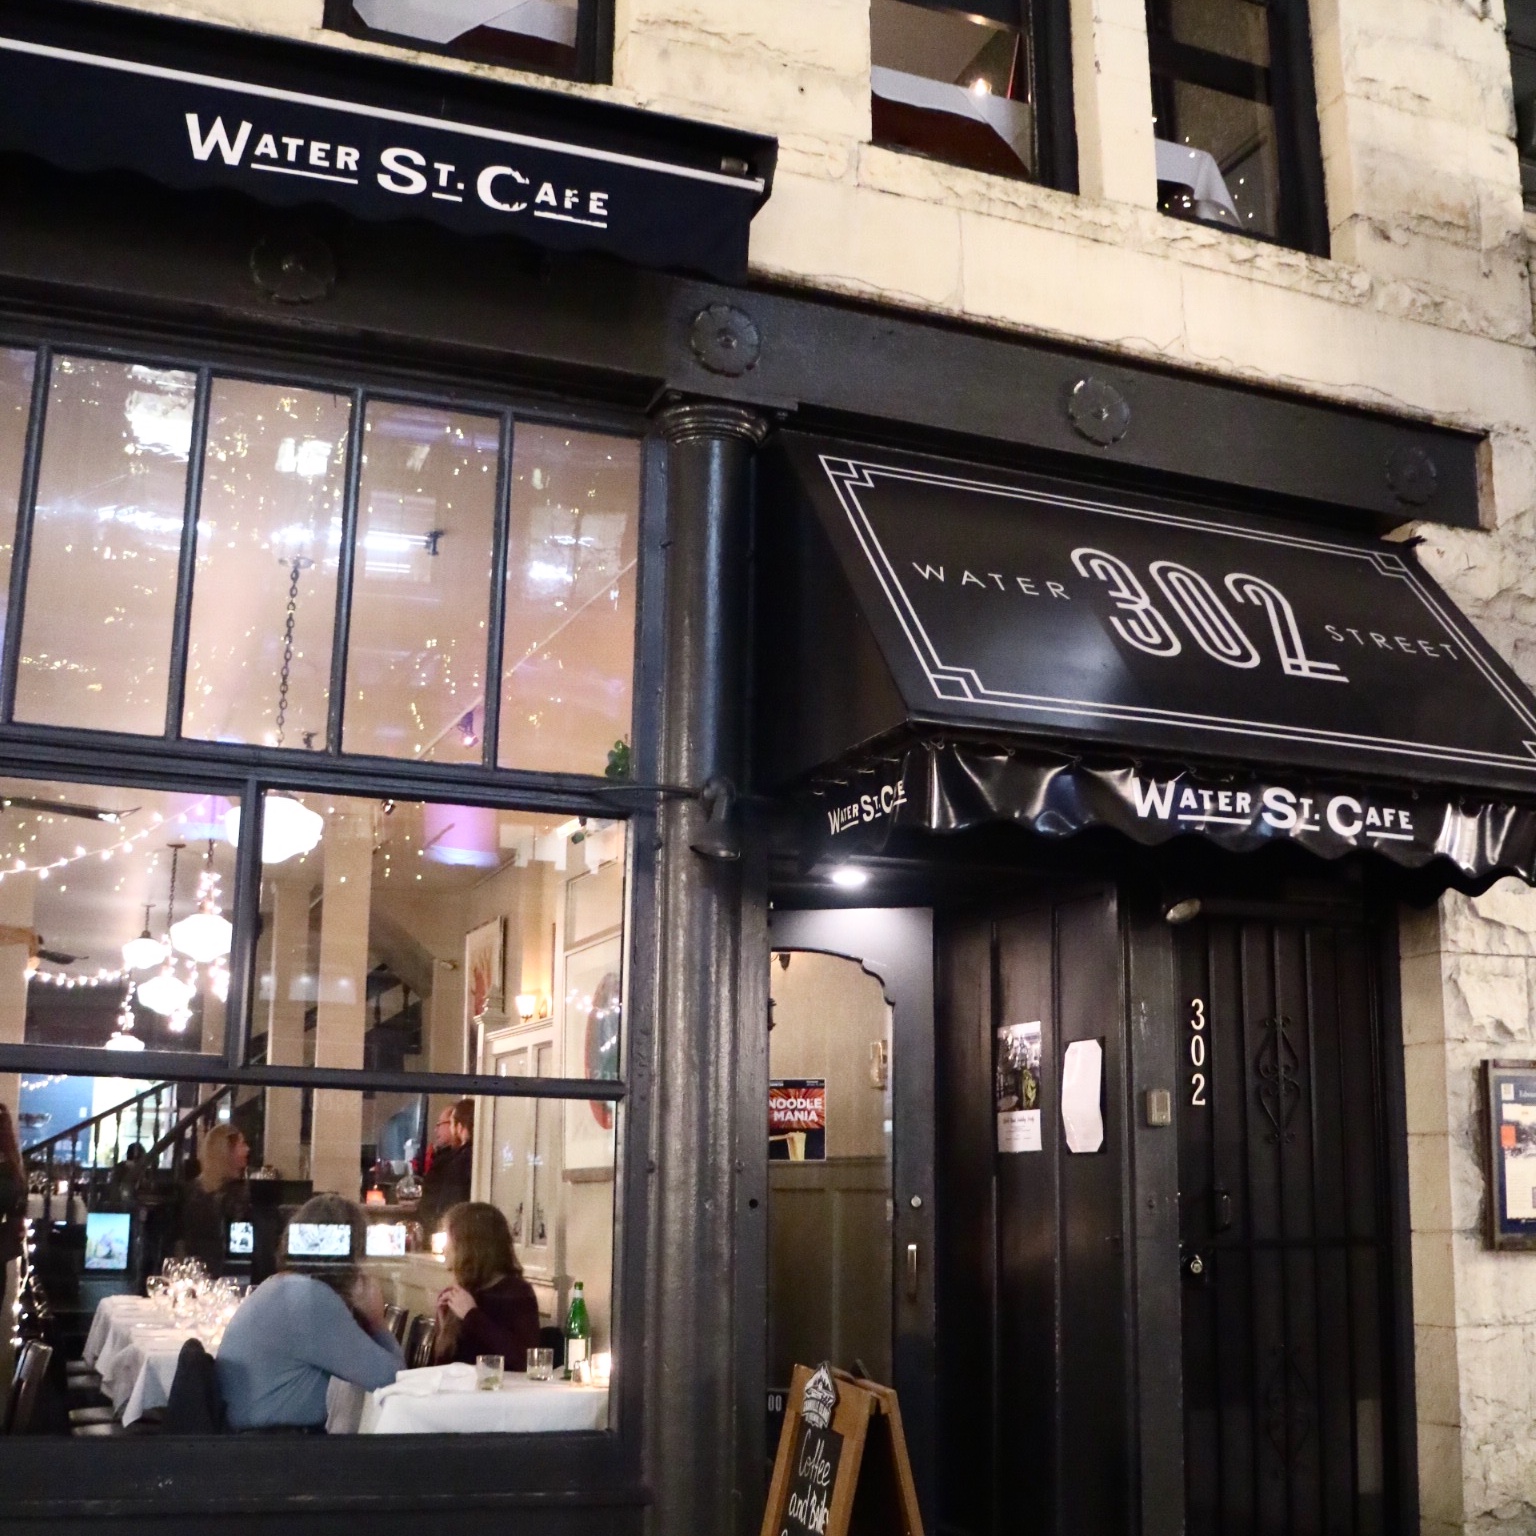 Water St. Cafe